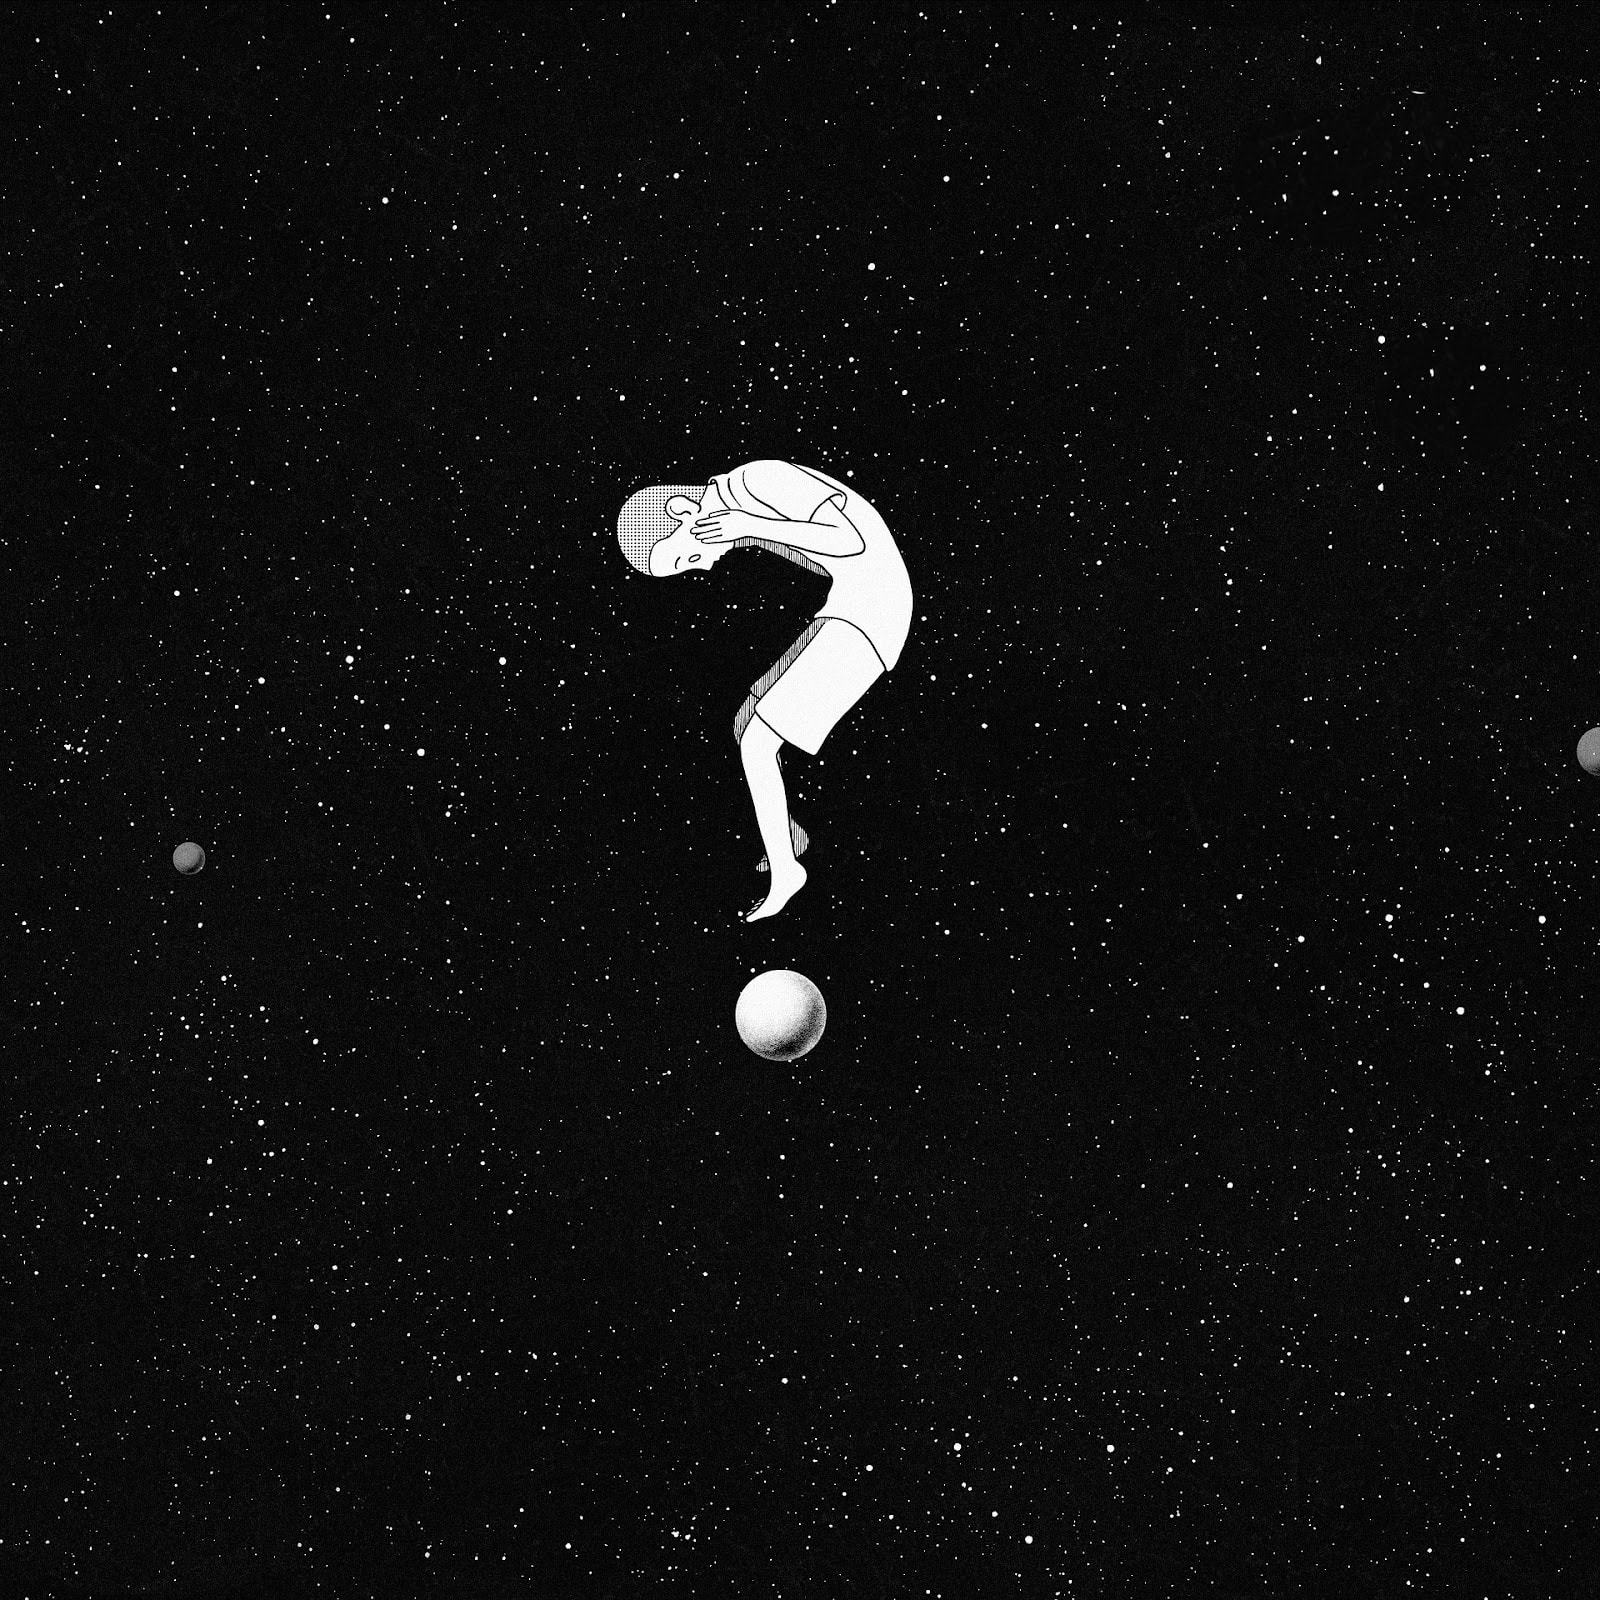 image of a person in the form of a question mark